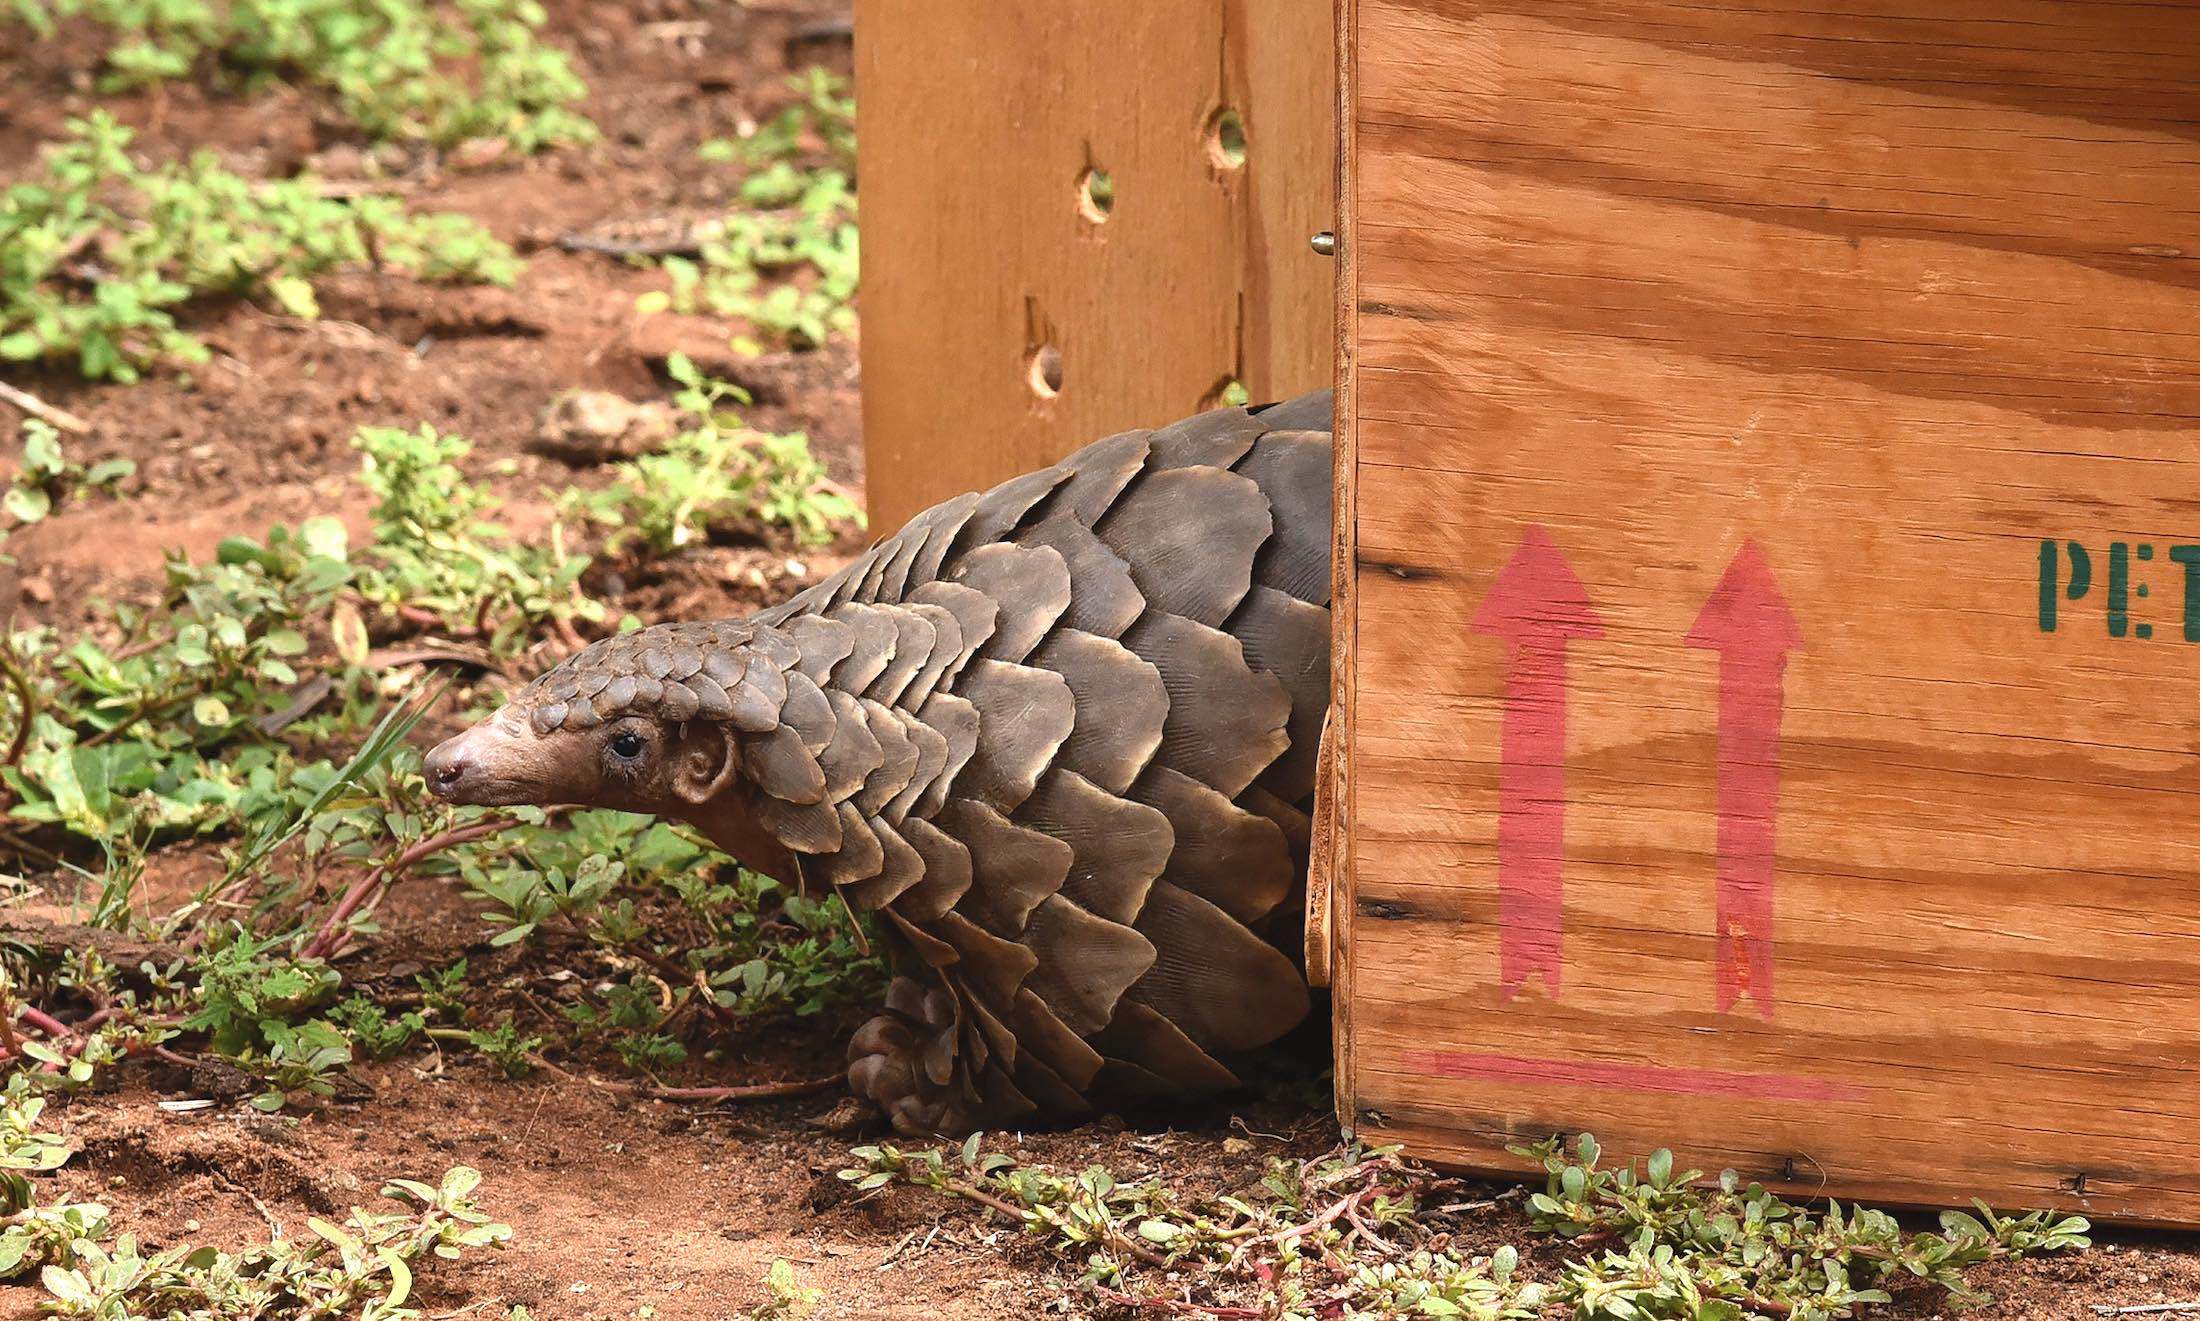 A pangolin emerges from a wooden crate.